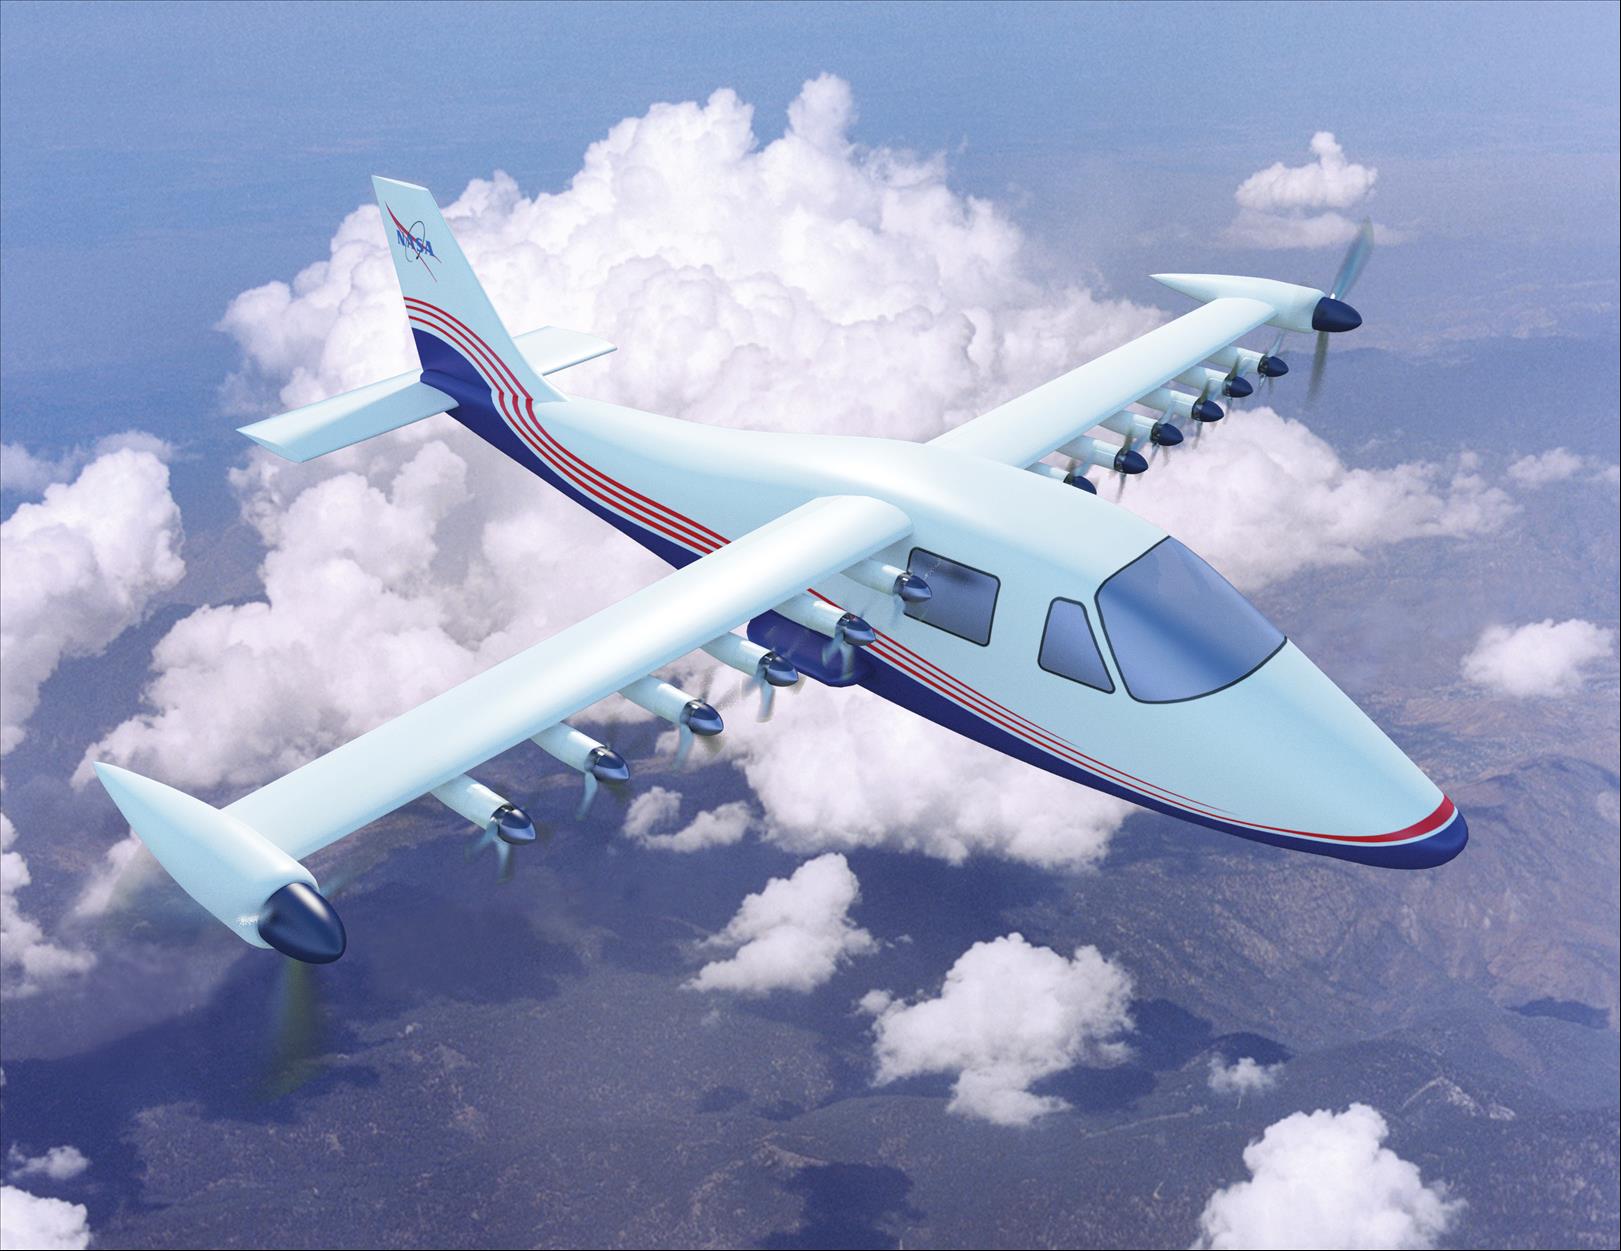 X-57: Nasa's Electric Plane Is Preparing To Fly  Here's How It Advances Emissionsfree Aviation